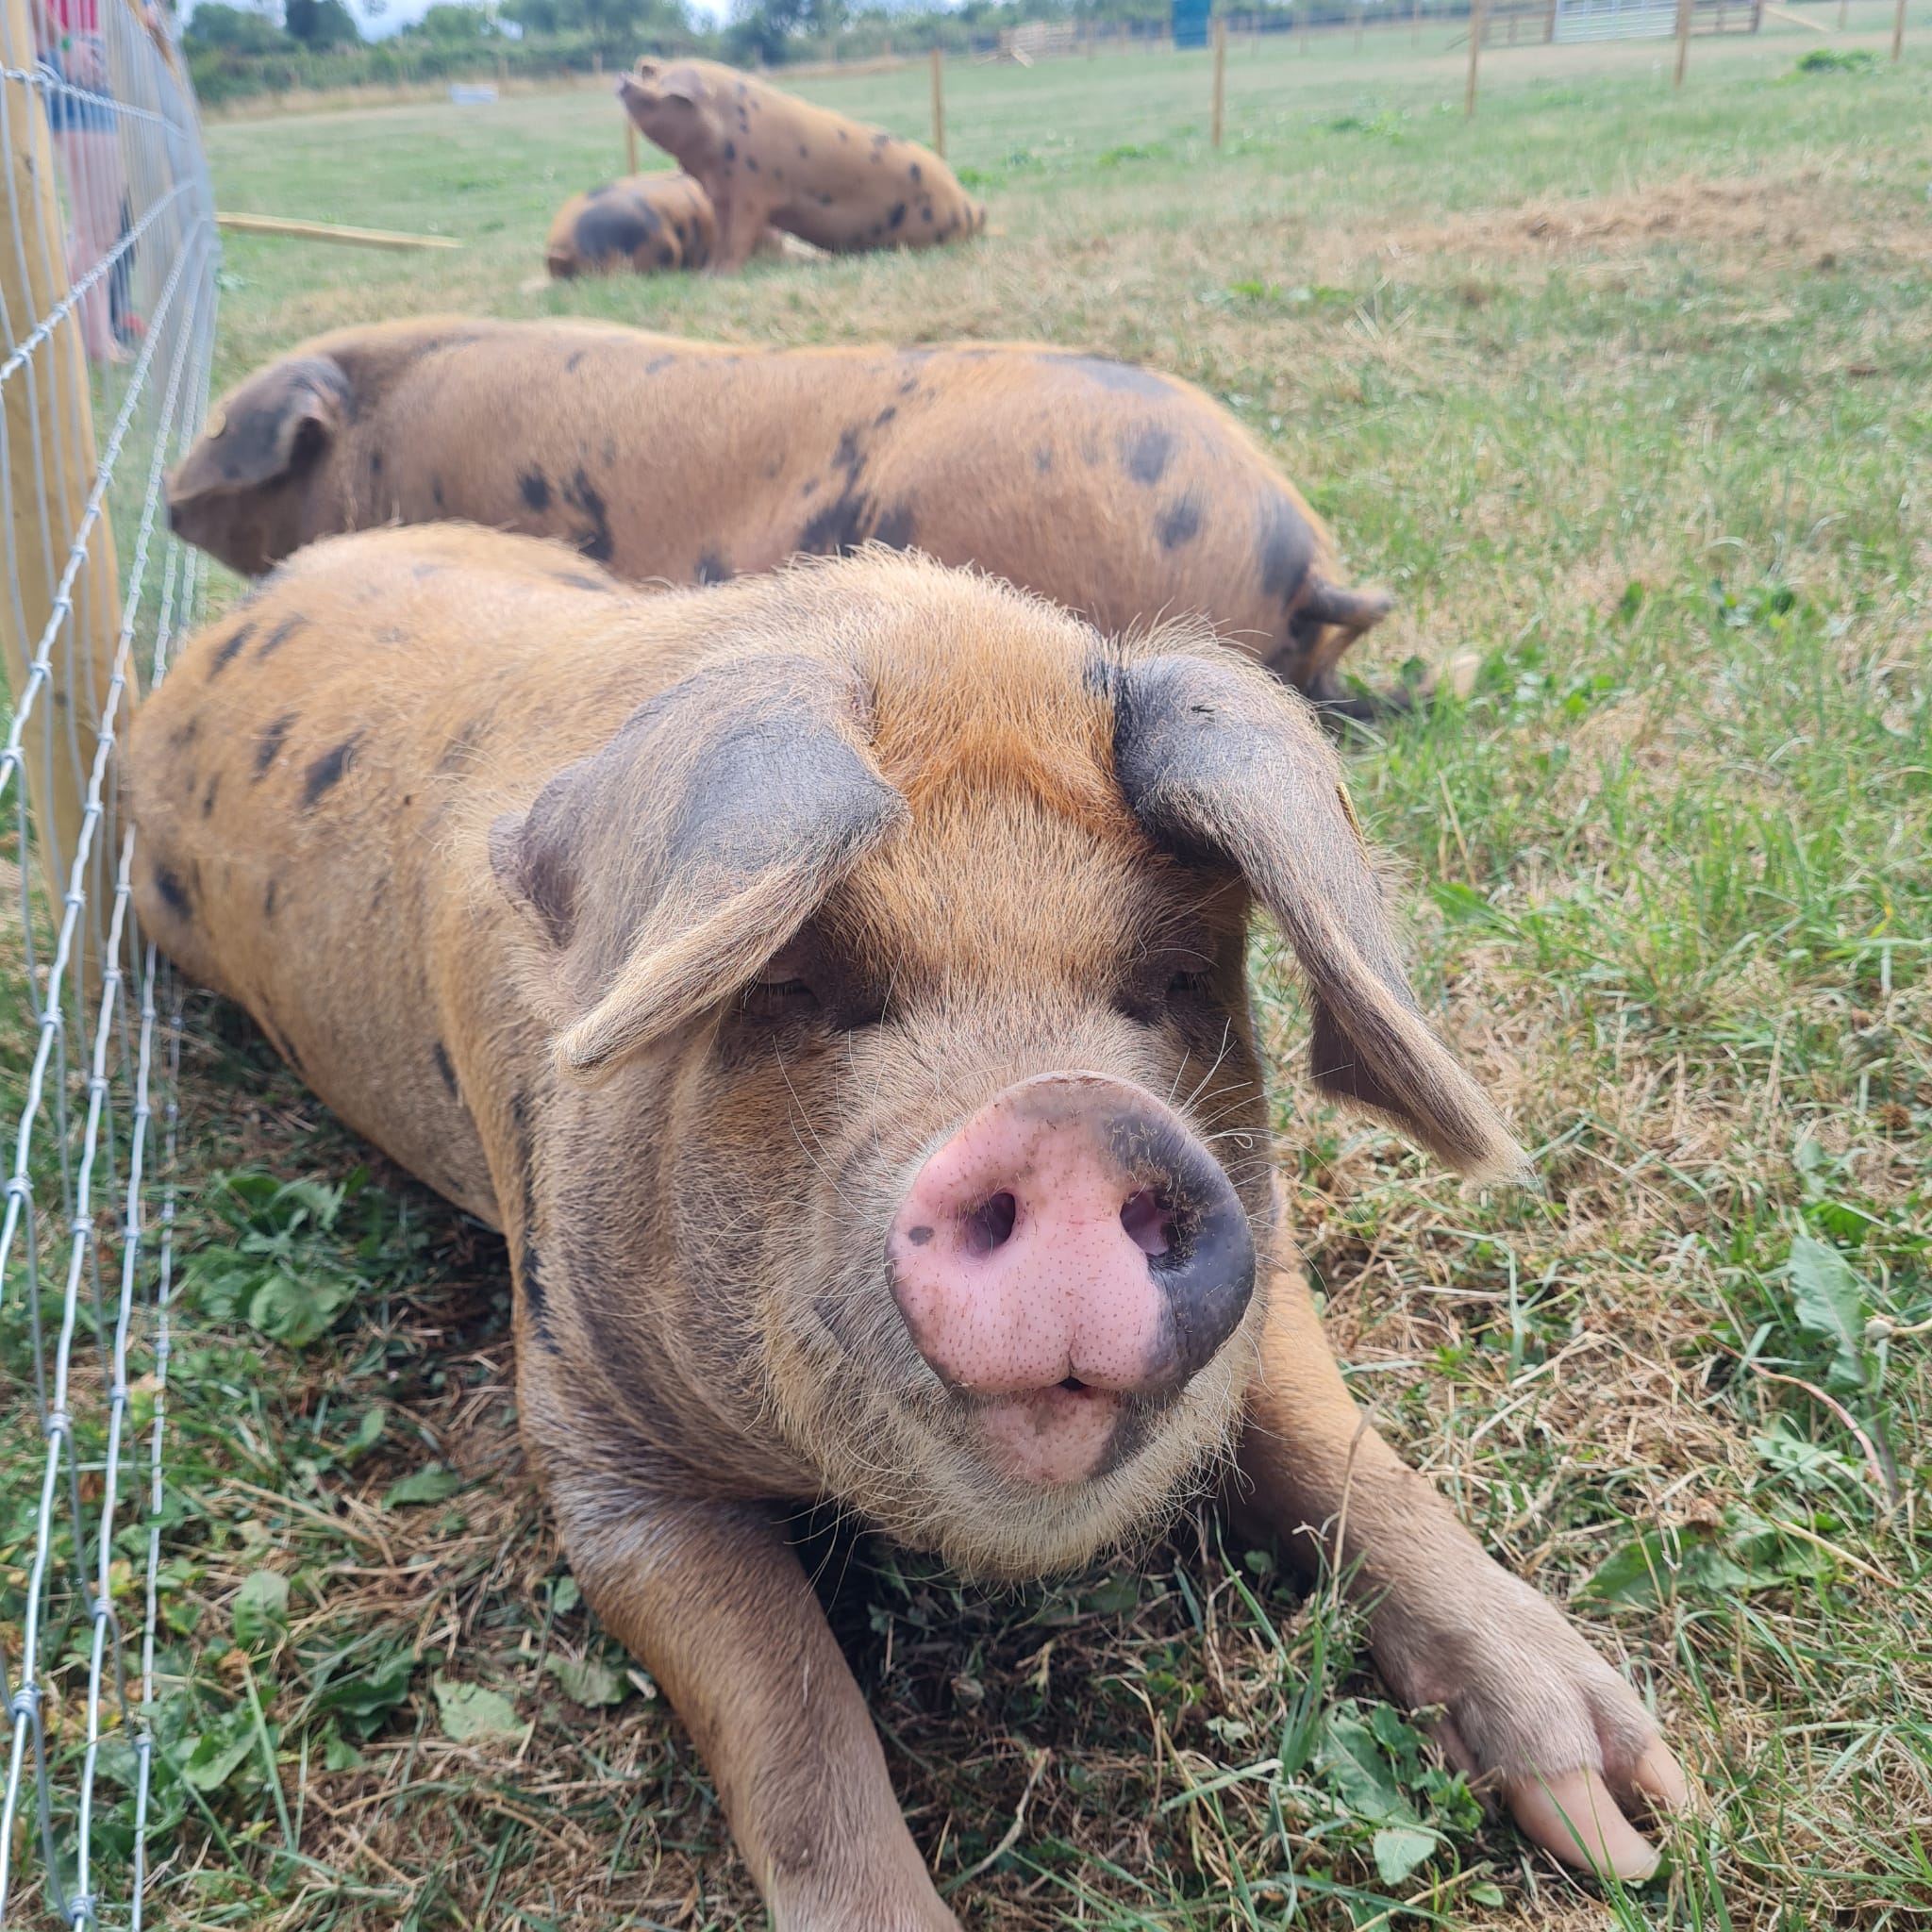 Close up of Tamworth pigs lying down together in field against the fence. Nearest pig looking straight at camera.